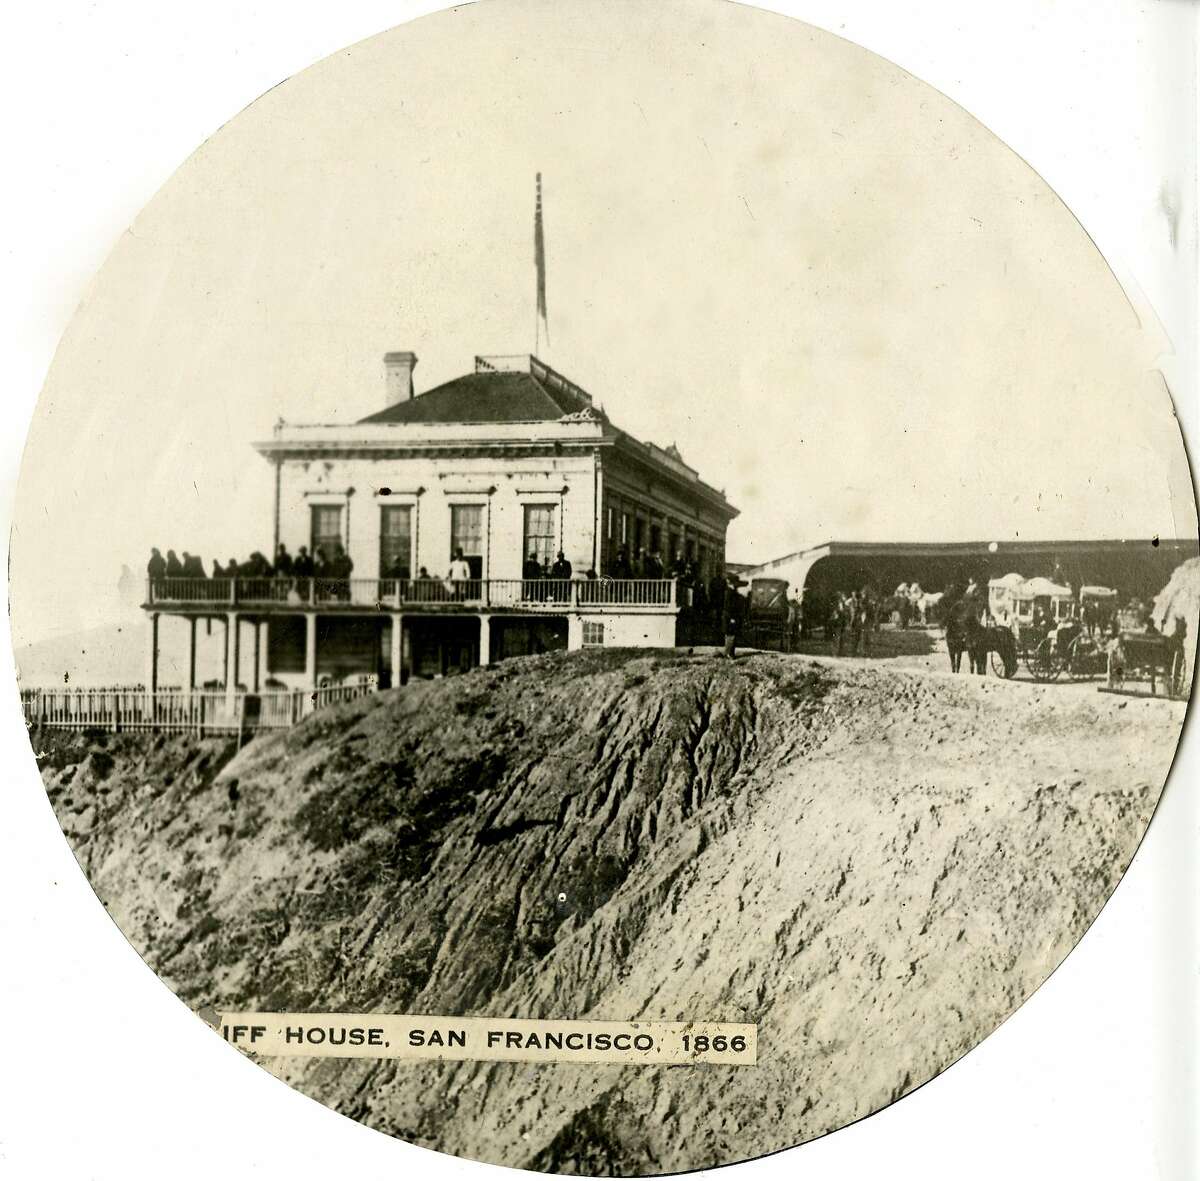 The Cliff House as it appeared in 1866.